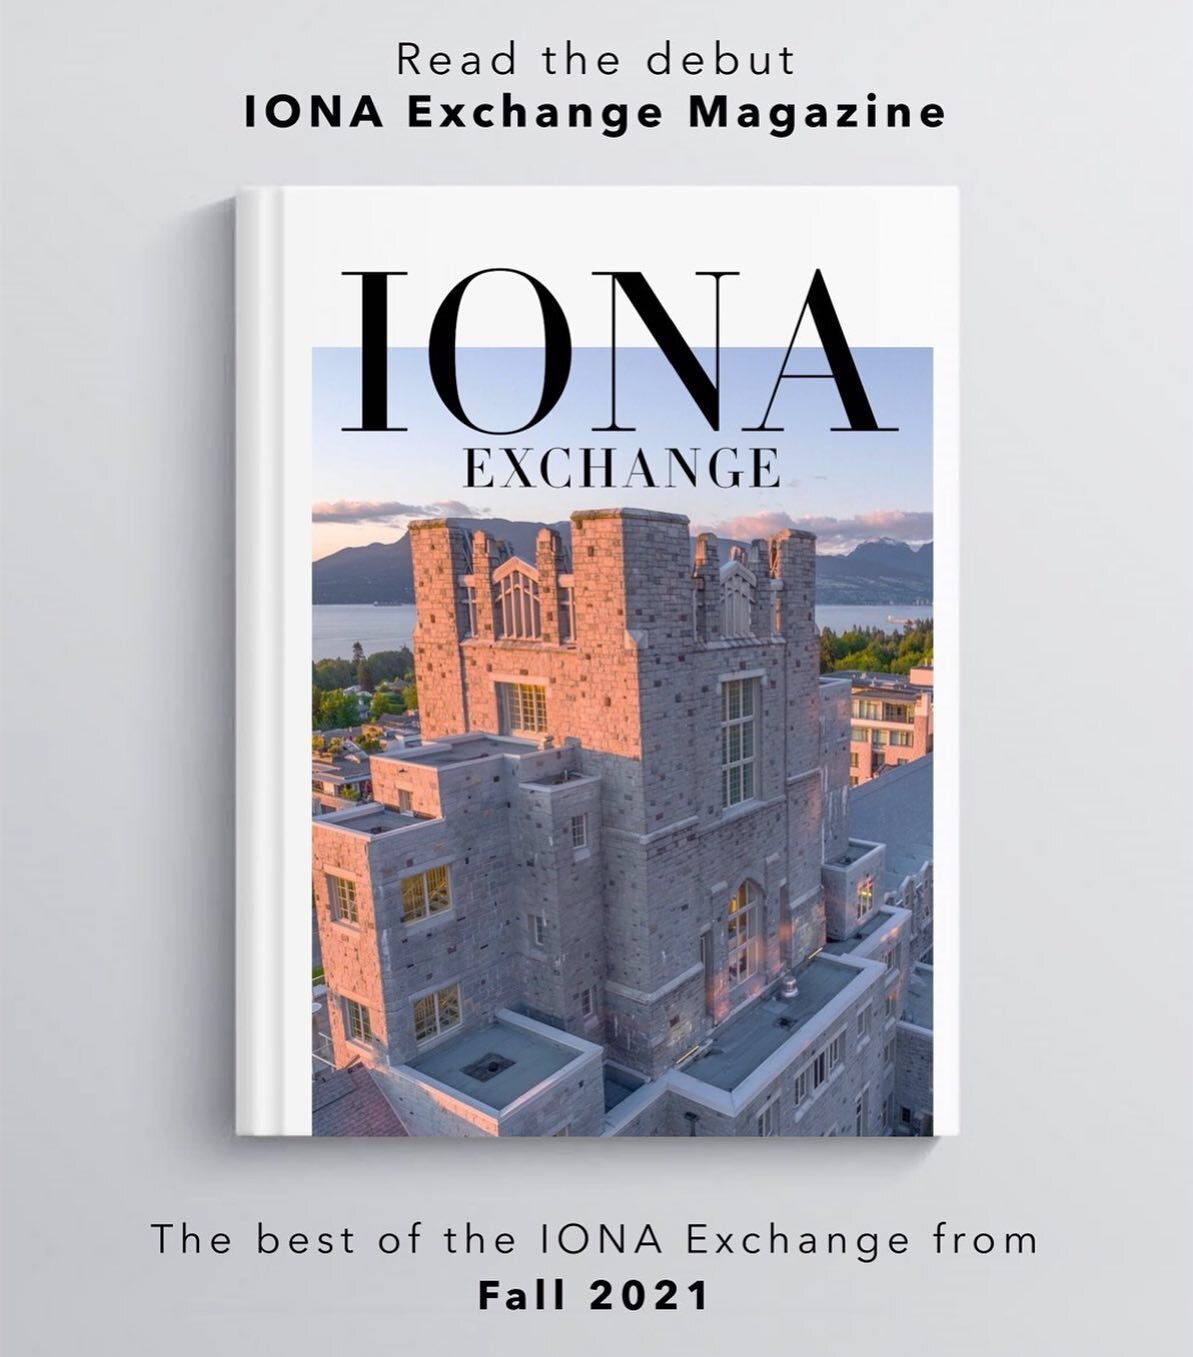 Contemporary economics, one click away: read the IONA Exchange Magazine for Fall 2021!

Published digitally, the IONA Exchange magazine showcases the most engaging and innovative economics articles written by our amazing IONA Exchange Authors. 

Read